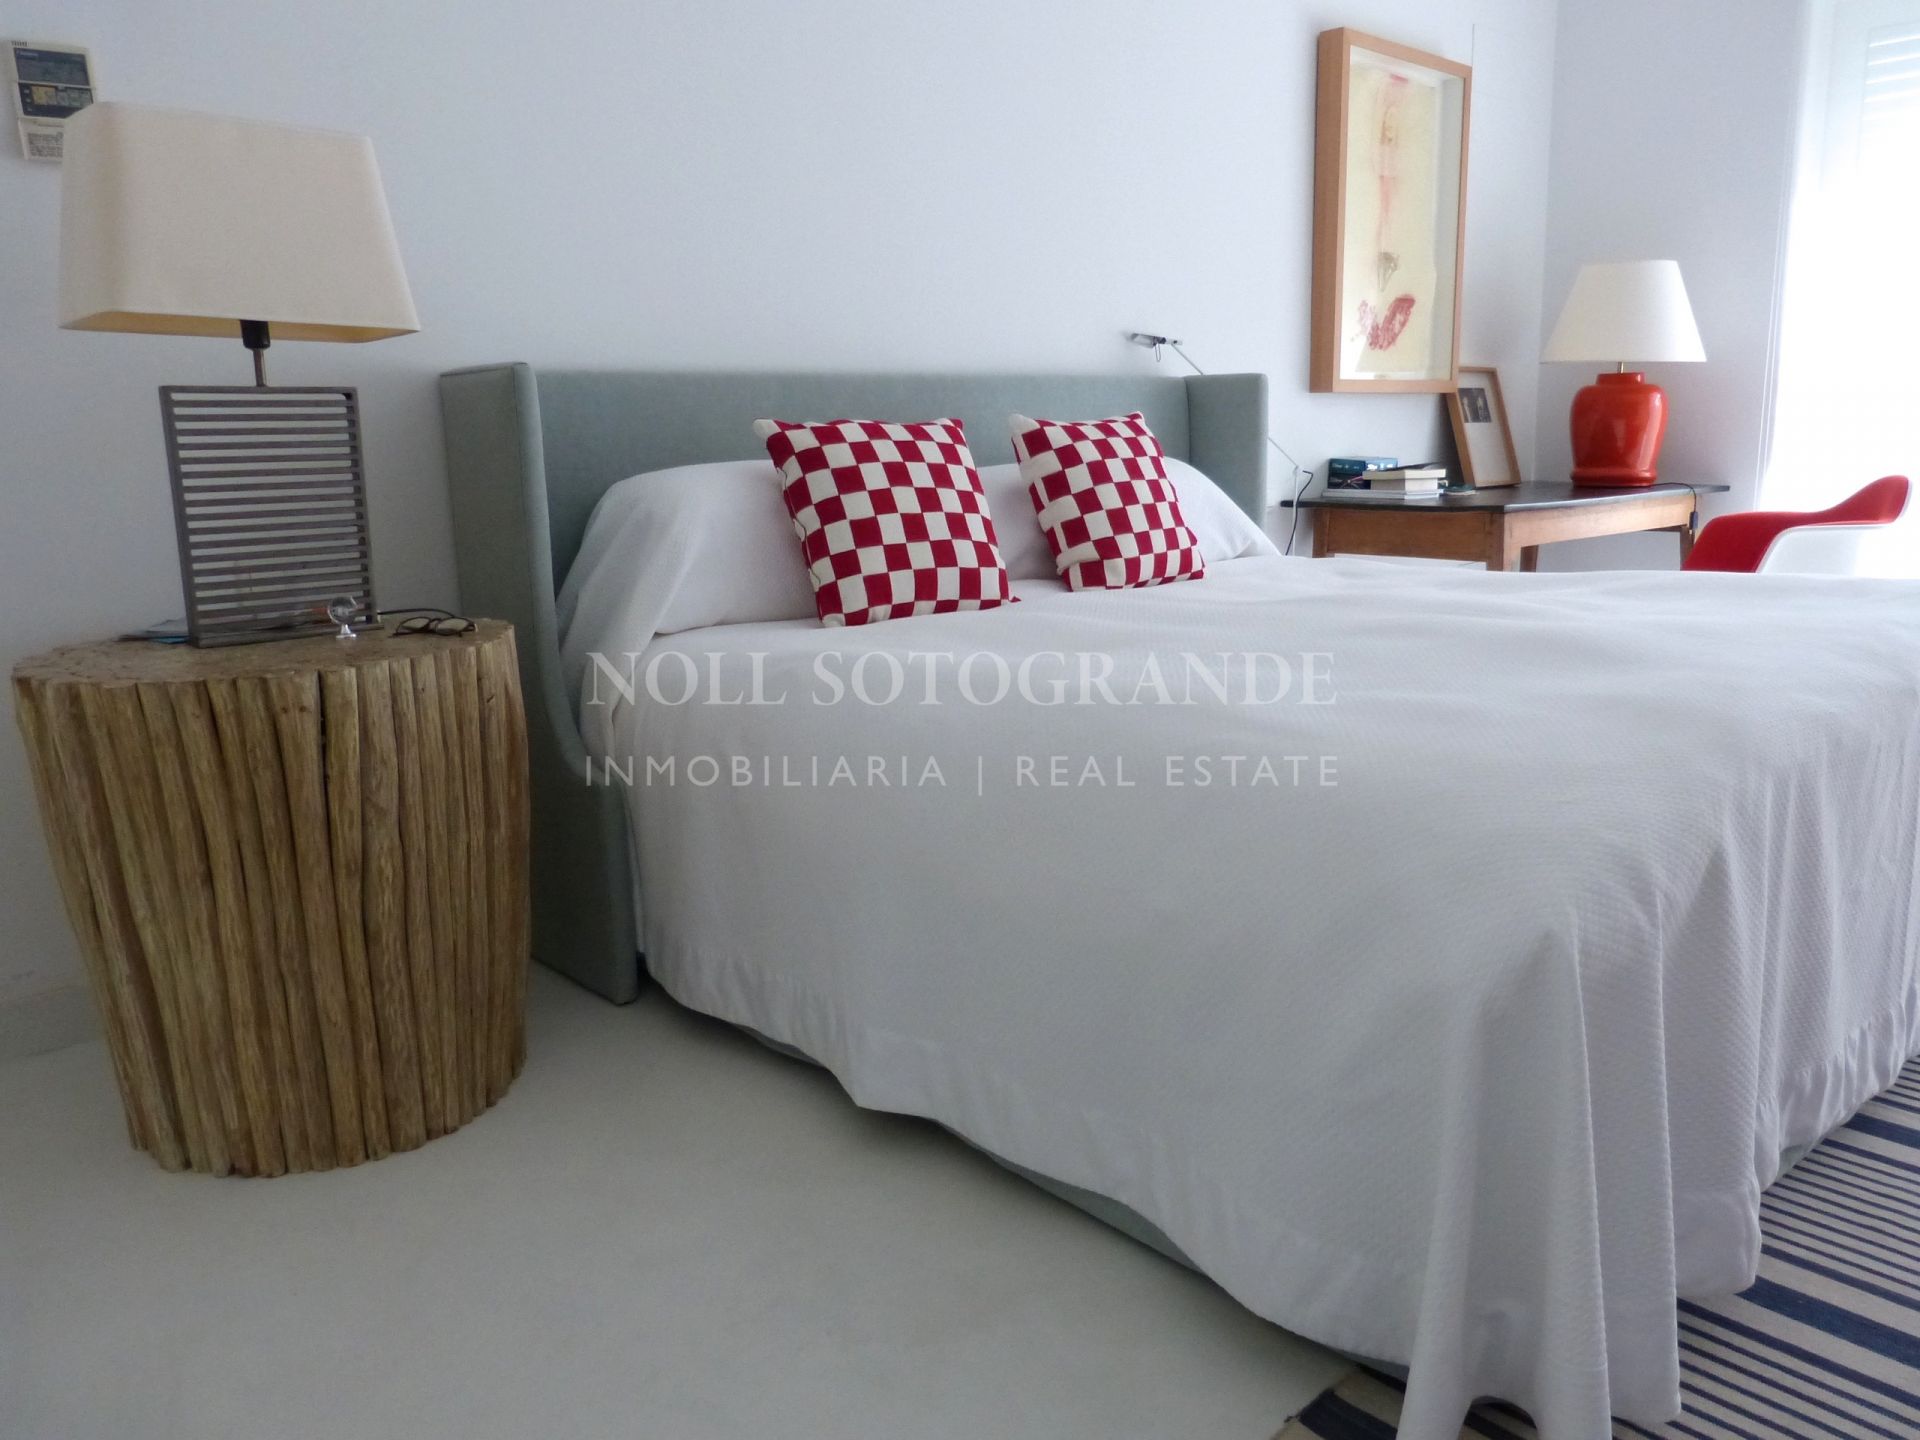 Large luxurious, modern apartment available in Sotogrande Pologardens